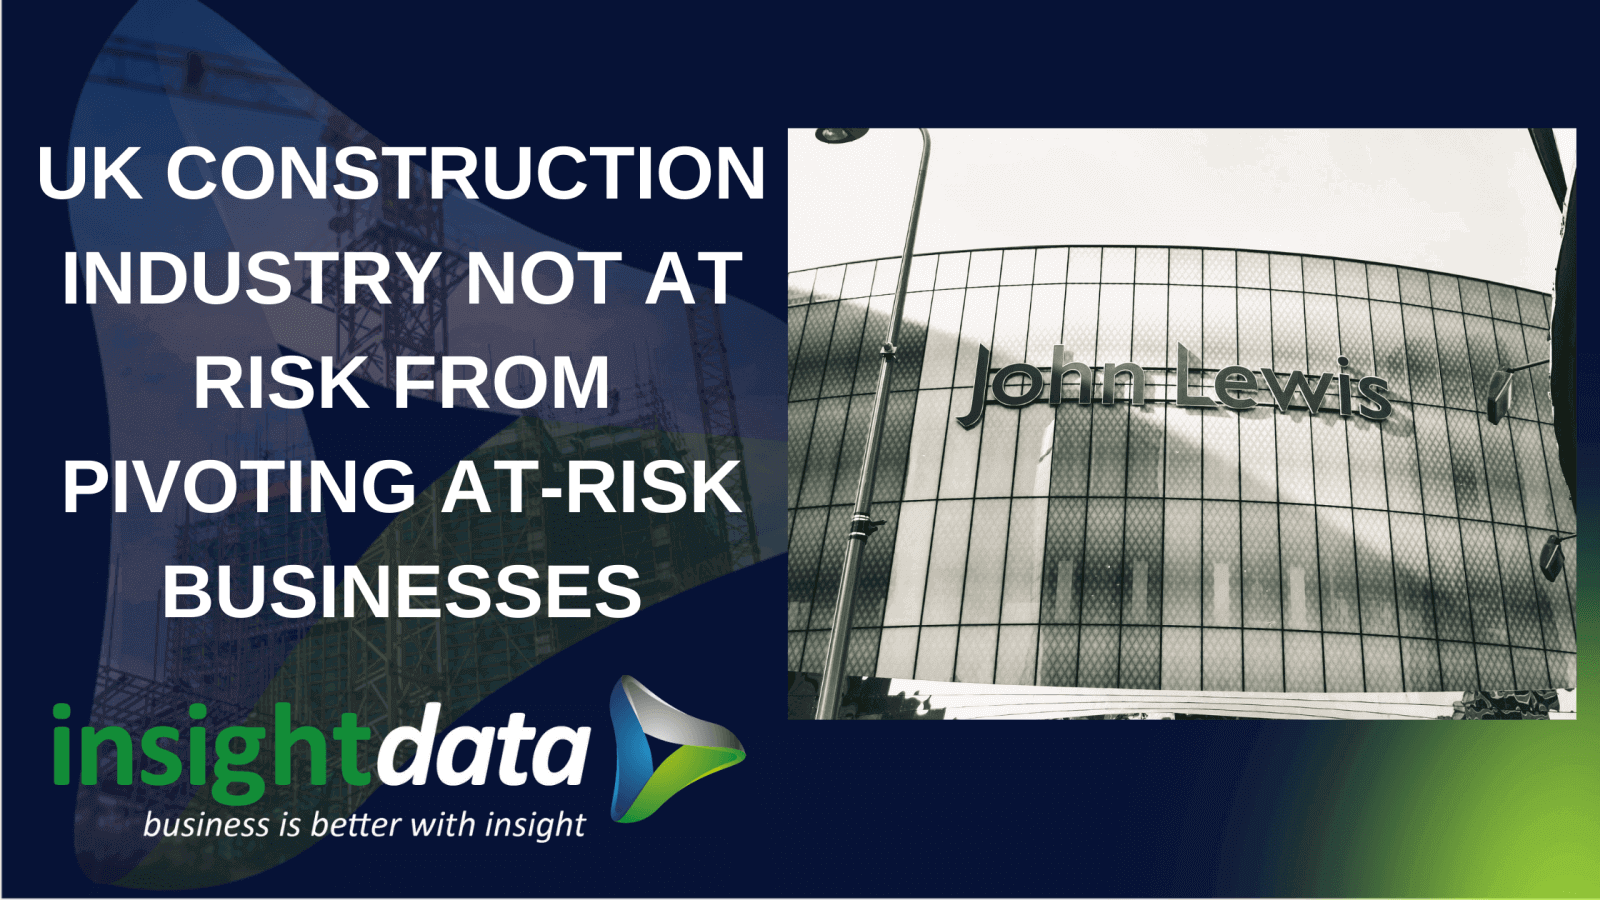 UK construction industry not at risk from pivoting at-risk businesses